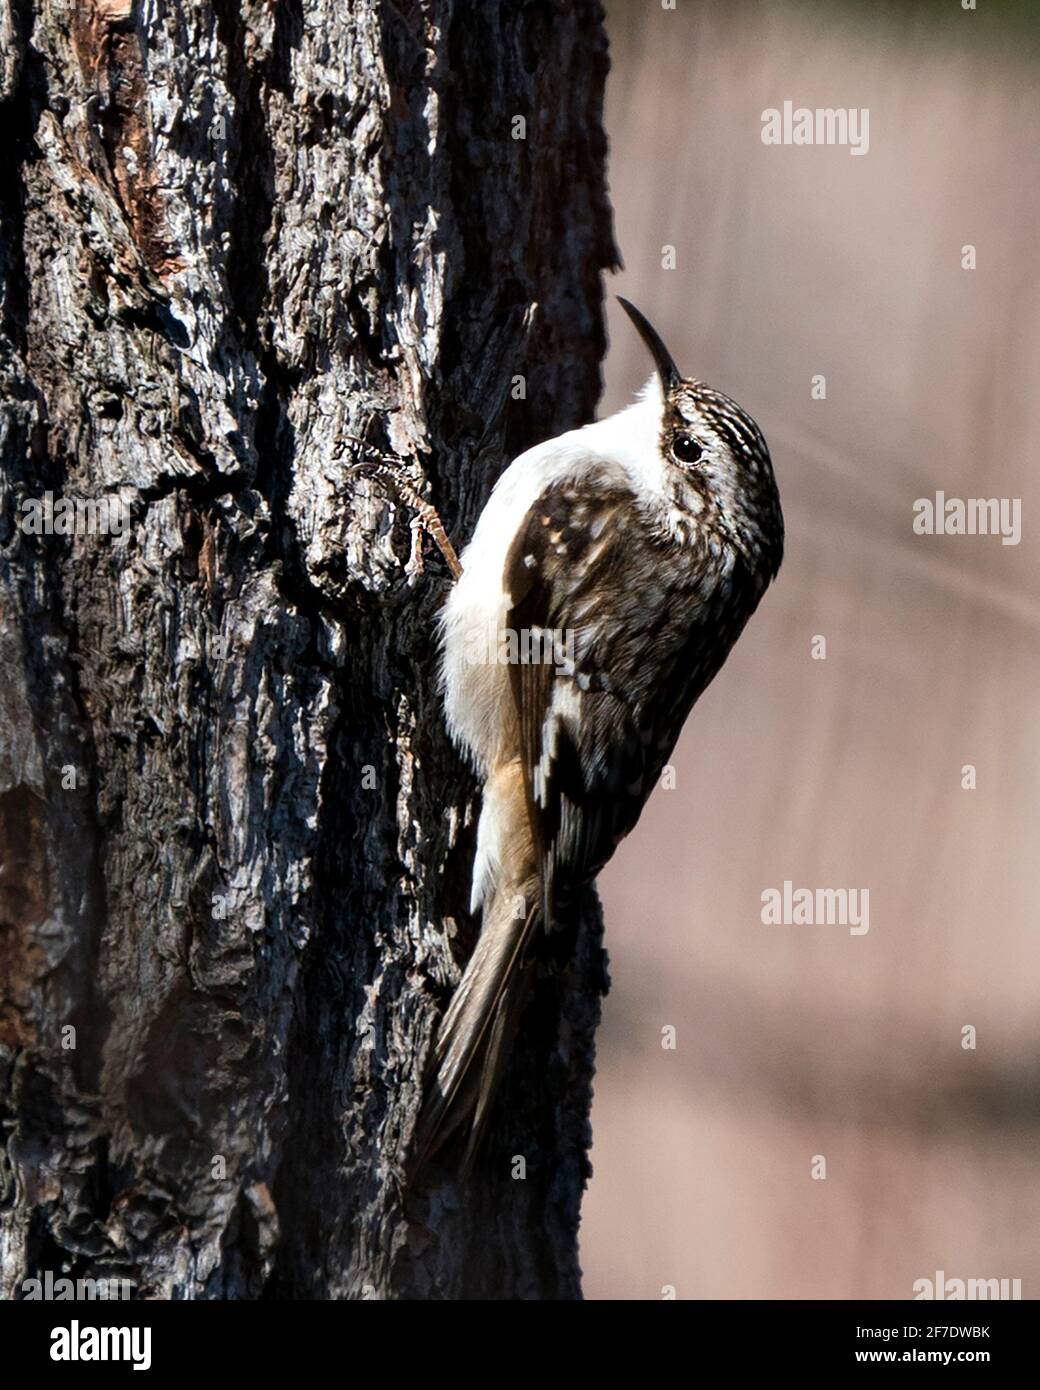 Brown Creeper bird close-up on a tree trunk looking for insect in its environment and habitat and displaying brown feathers, curved claws hook. Stock Photo